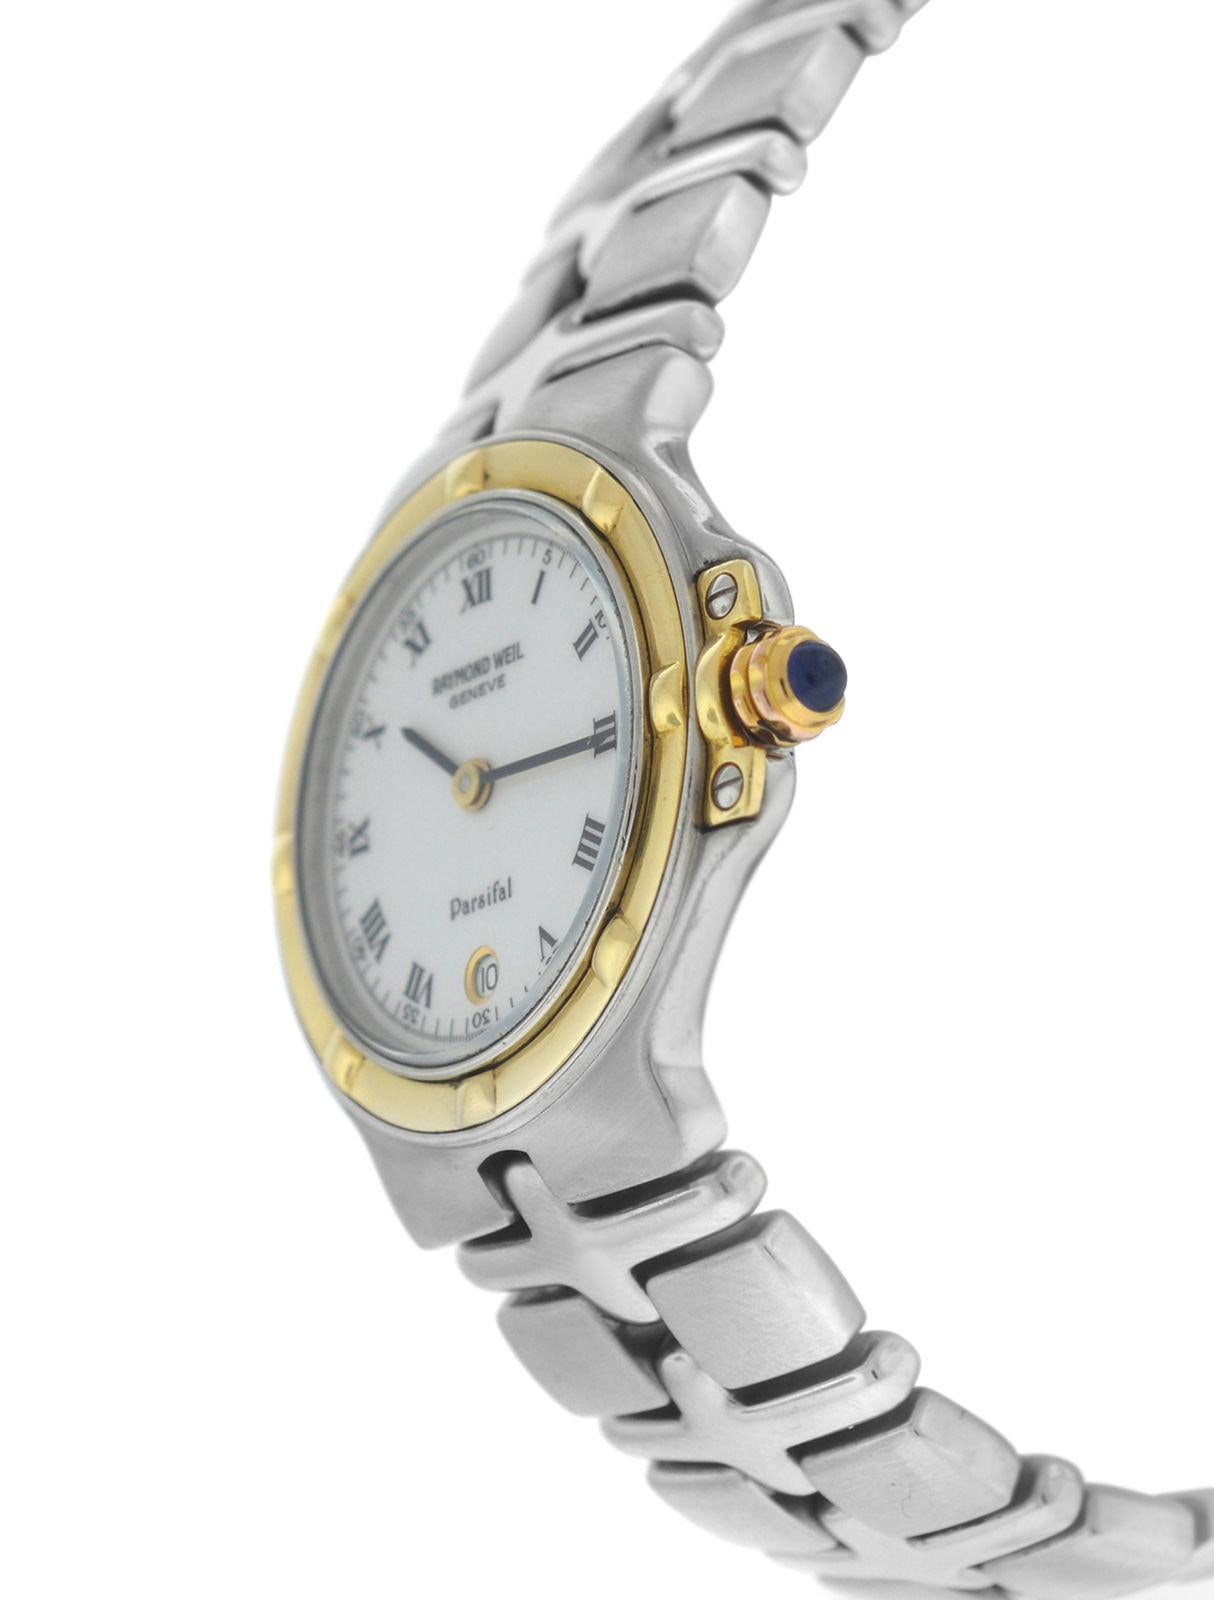 Brand	Raymond Weil
Model	Parsifal 9988
Gender	Ladies
Condition	Pre-owned
Movement	Swiss Quartz
Case Material	Stainless Steel  & 18K Yellow Gold
Bracelet / Strap Material	
Stainless Steel 

Clasp / Buckle Material	
Stainless Steel 

Clasp